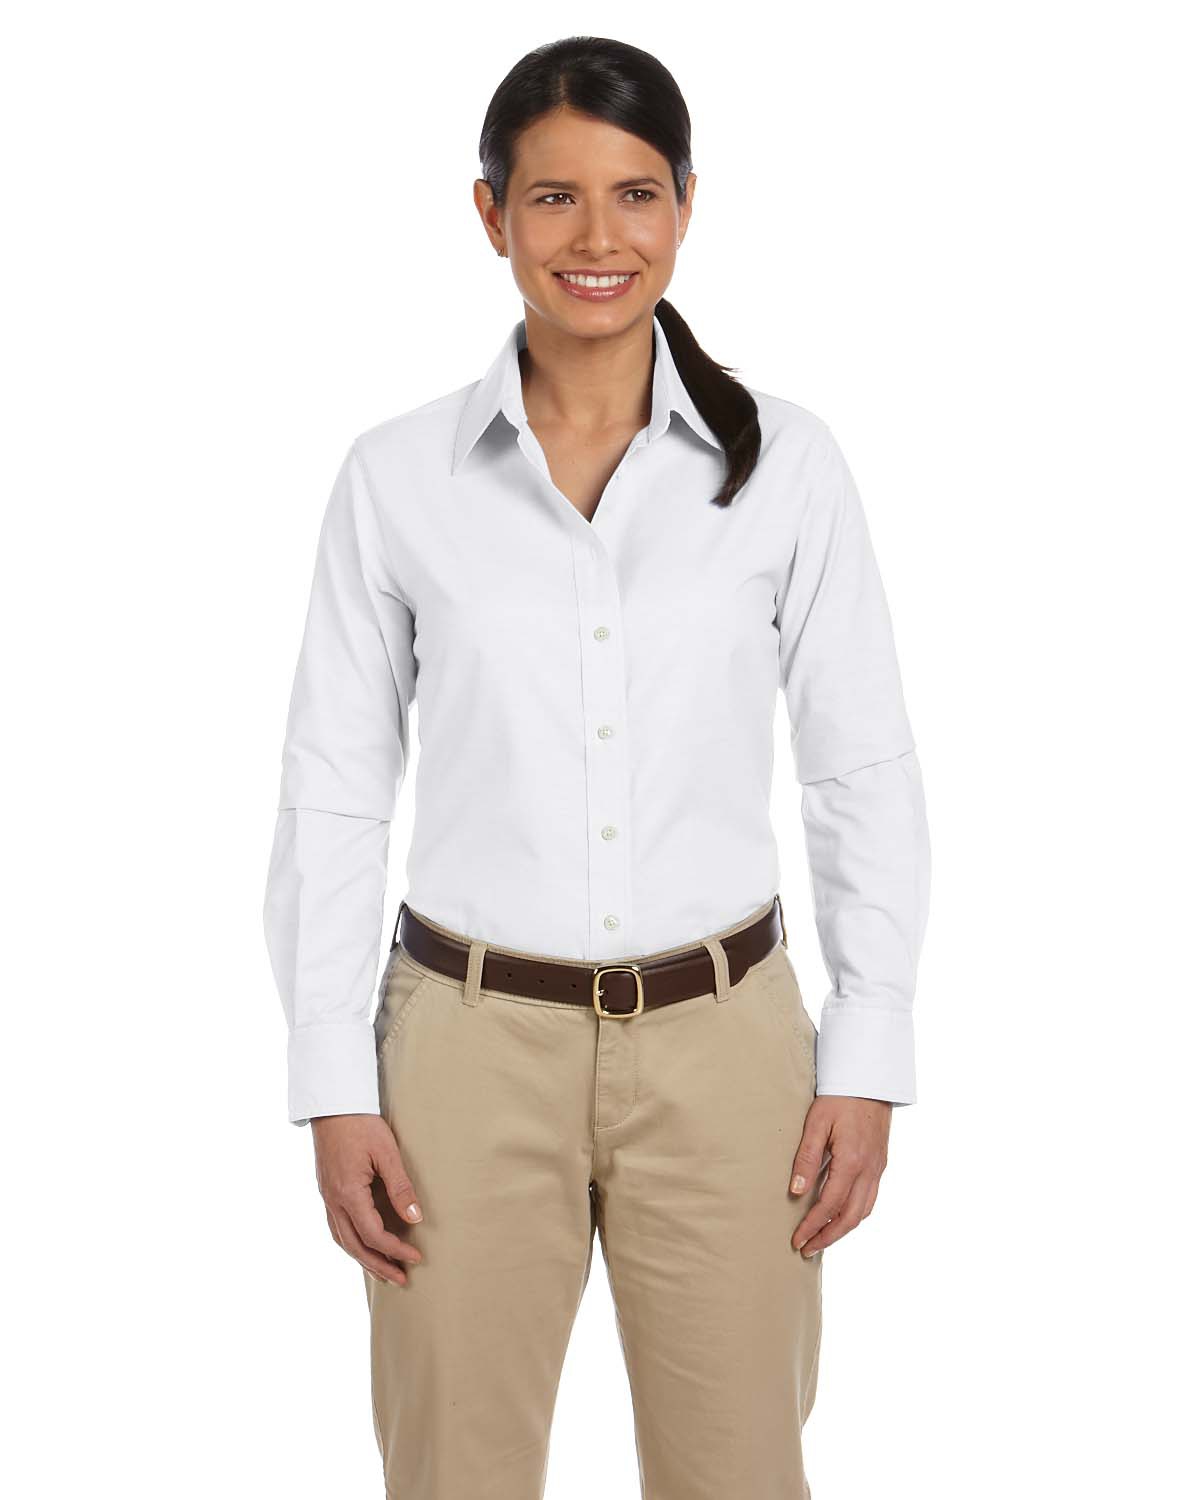 'Harriton M600W Ladies Long-Sleeve Oxford with Stain-Release'